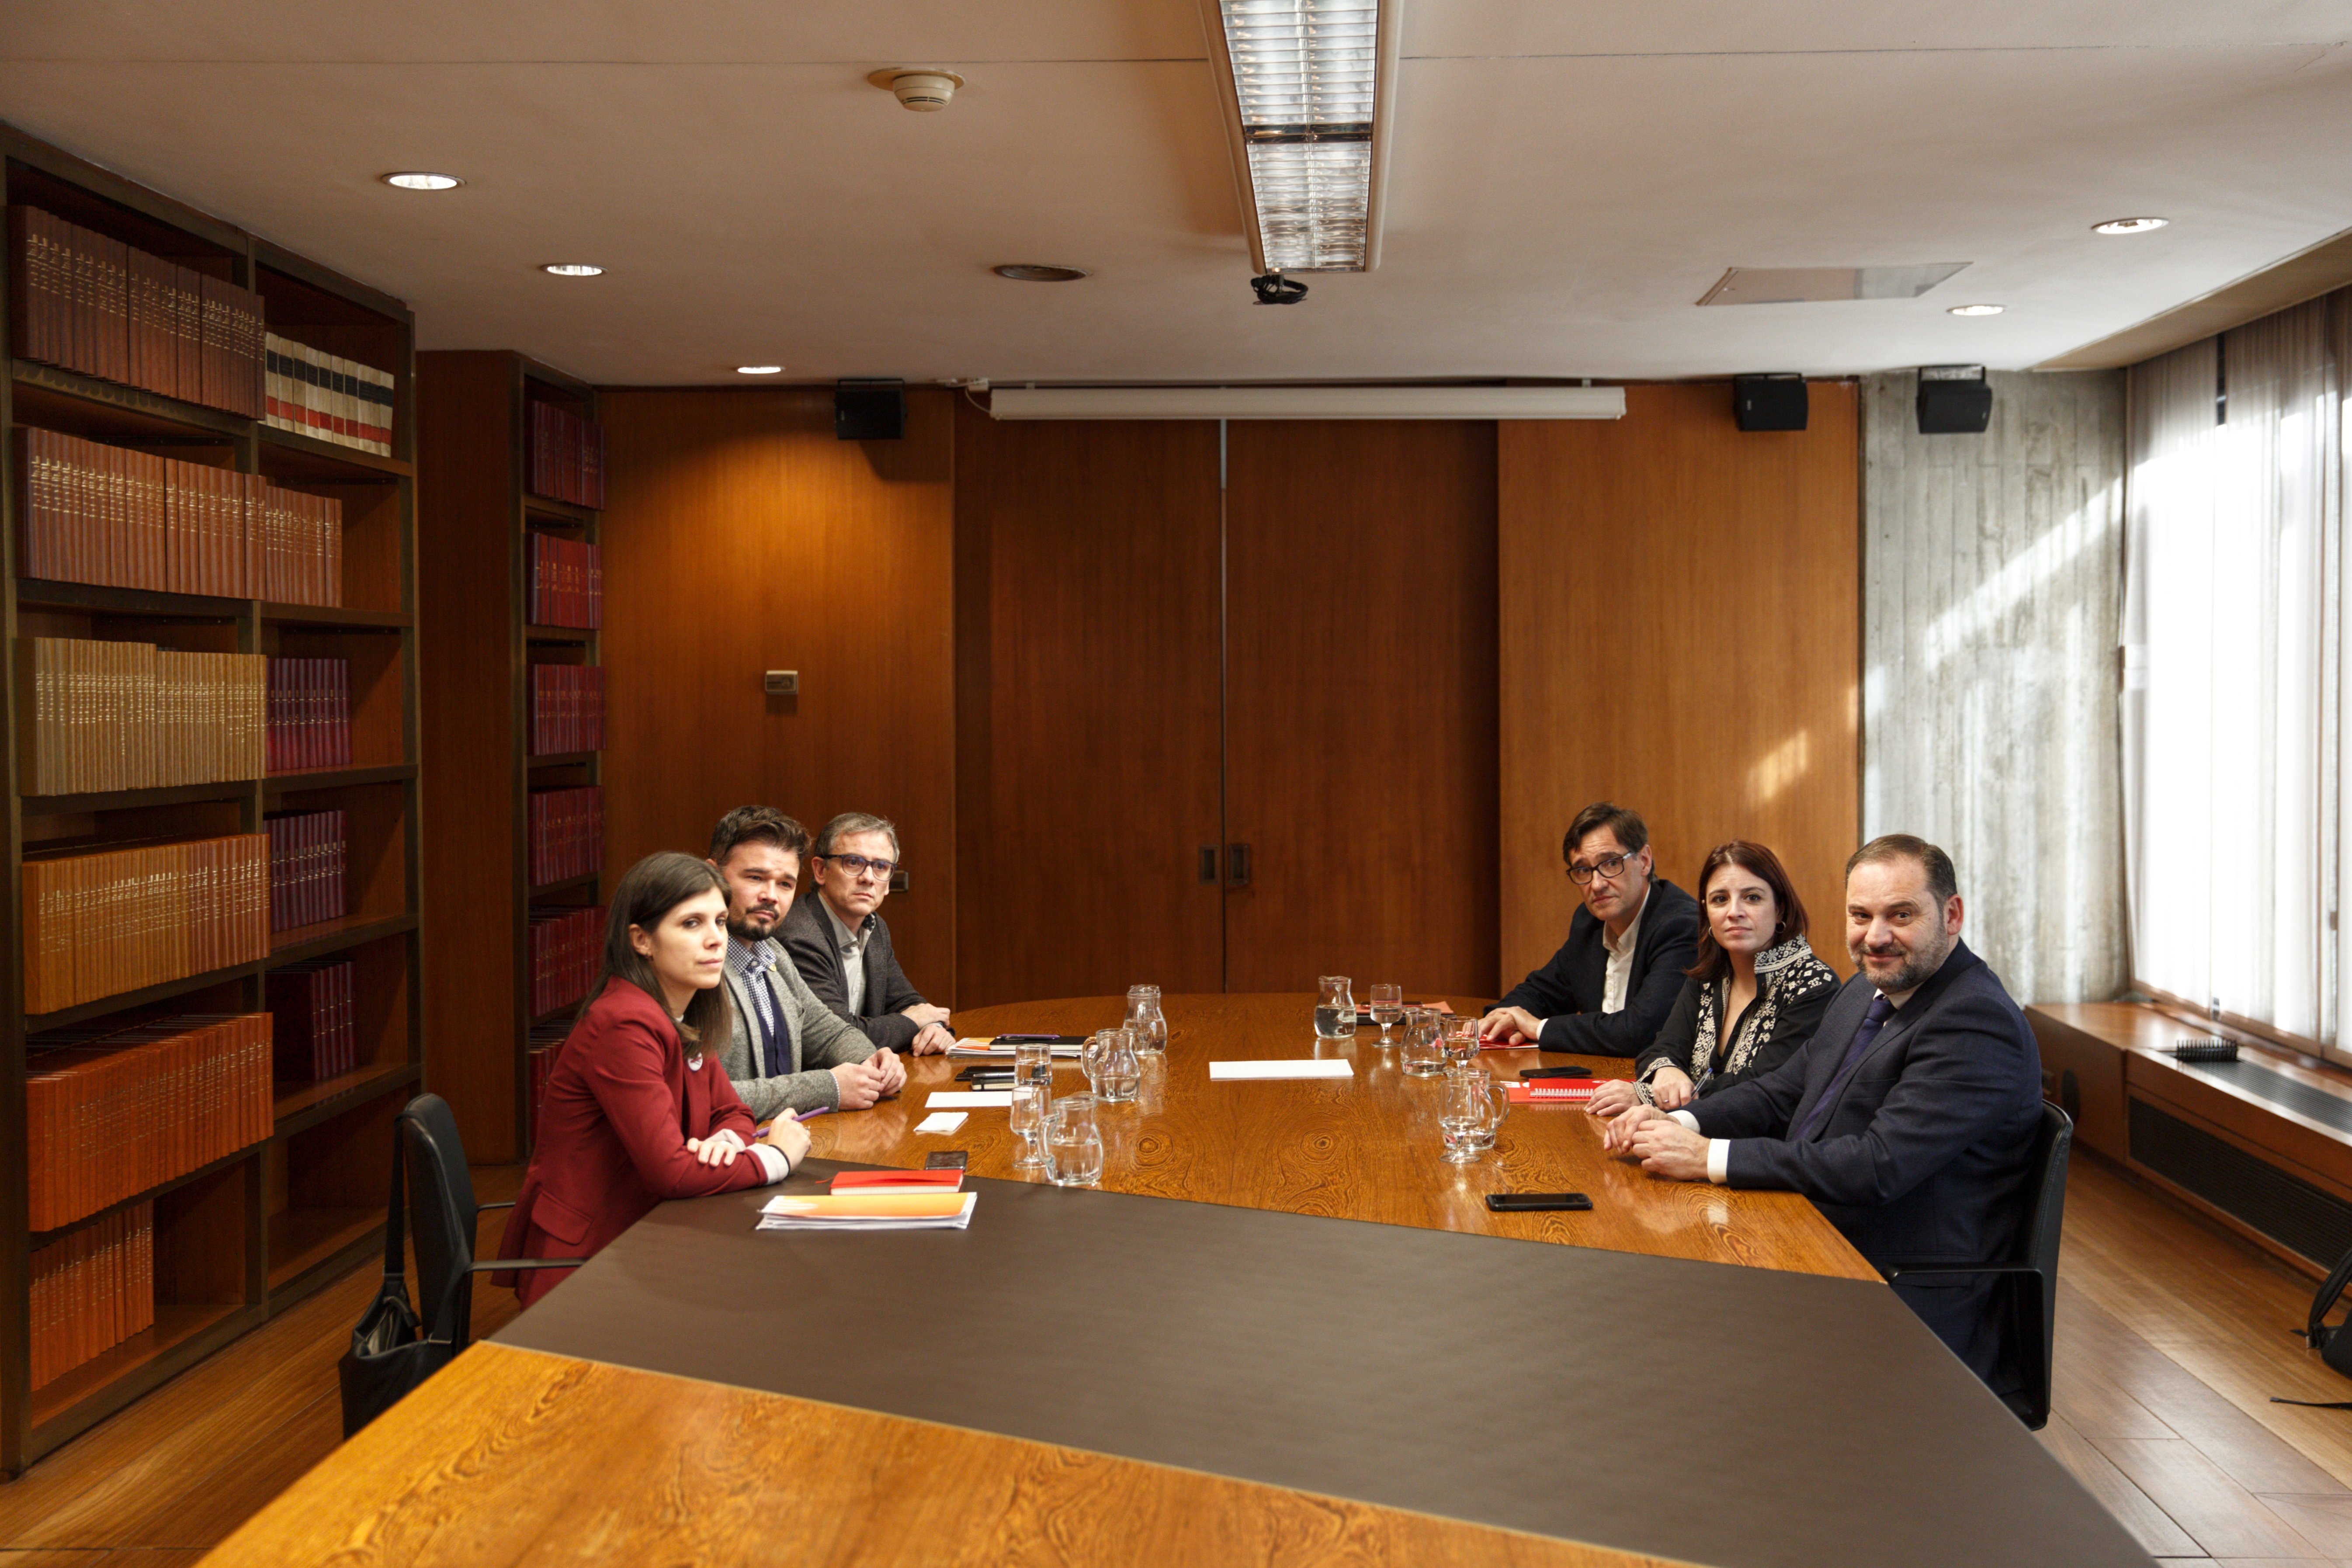 ERC awaits responses on Junqueras case to complete government accord with PSOE